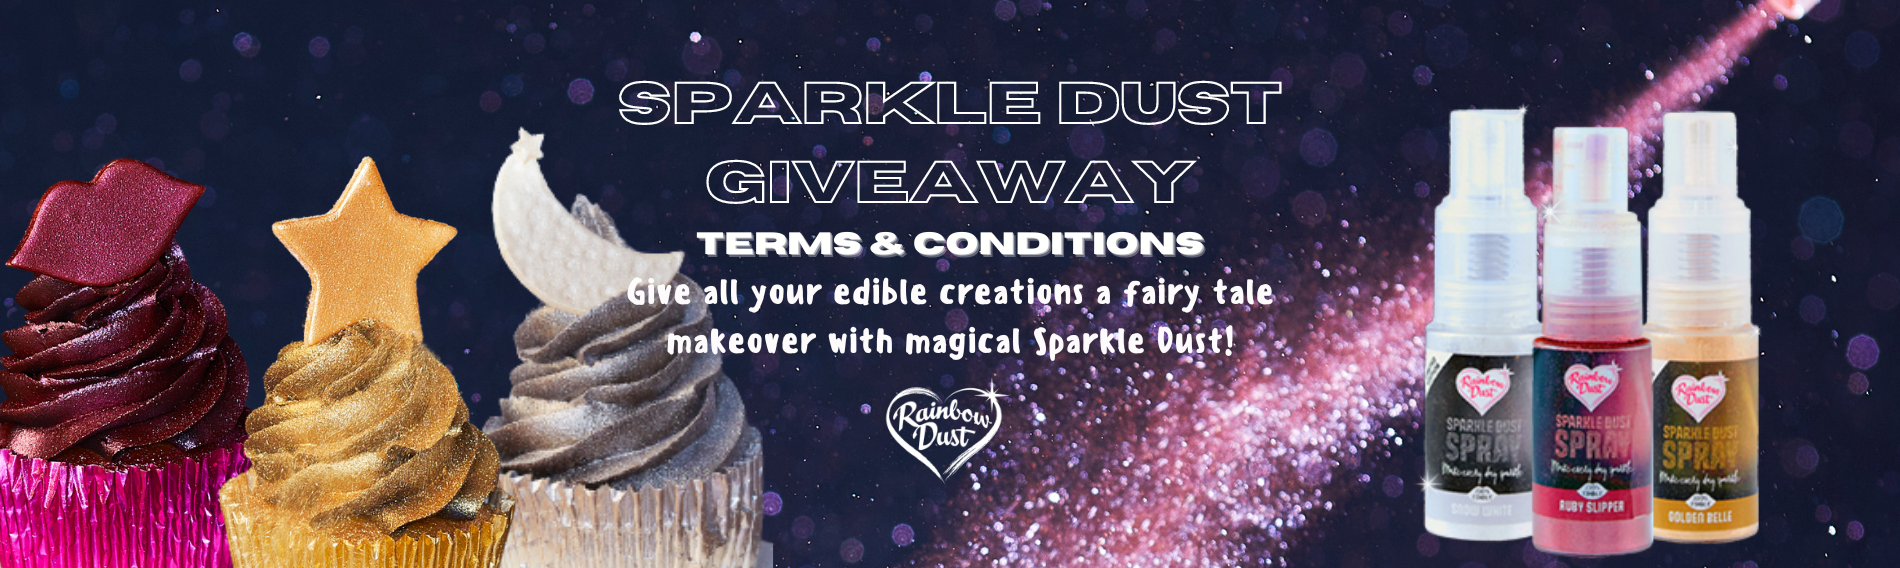 Sparkle Dust covered cupcakes, with the pump spray bottles reading 'Sparkle Dust giveaway terms and conditions. Give all your edible creations a fairy tale makeover with magical sparkle dust.